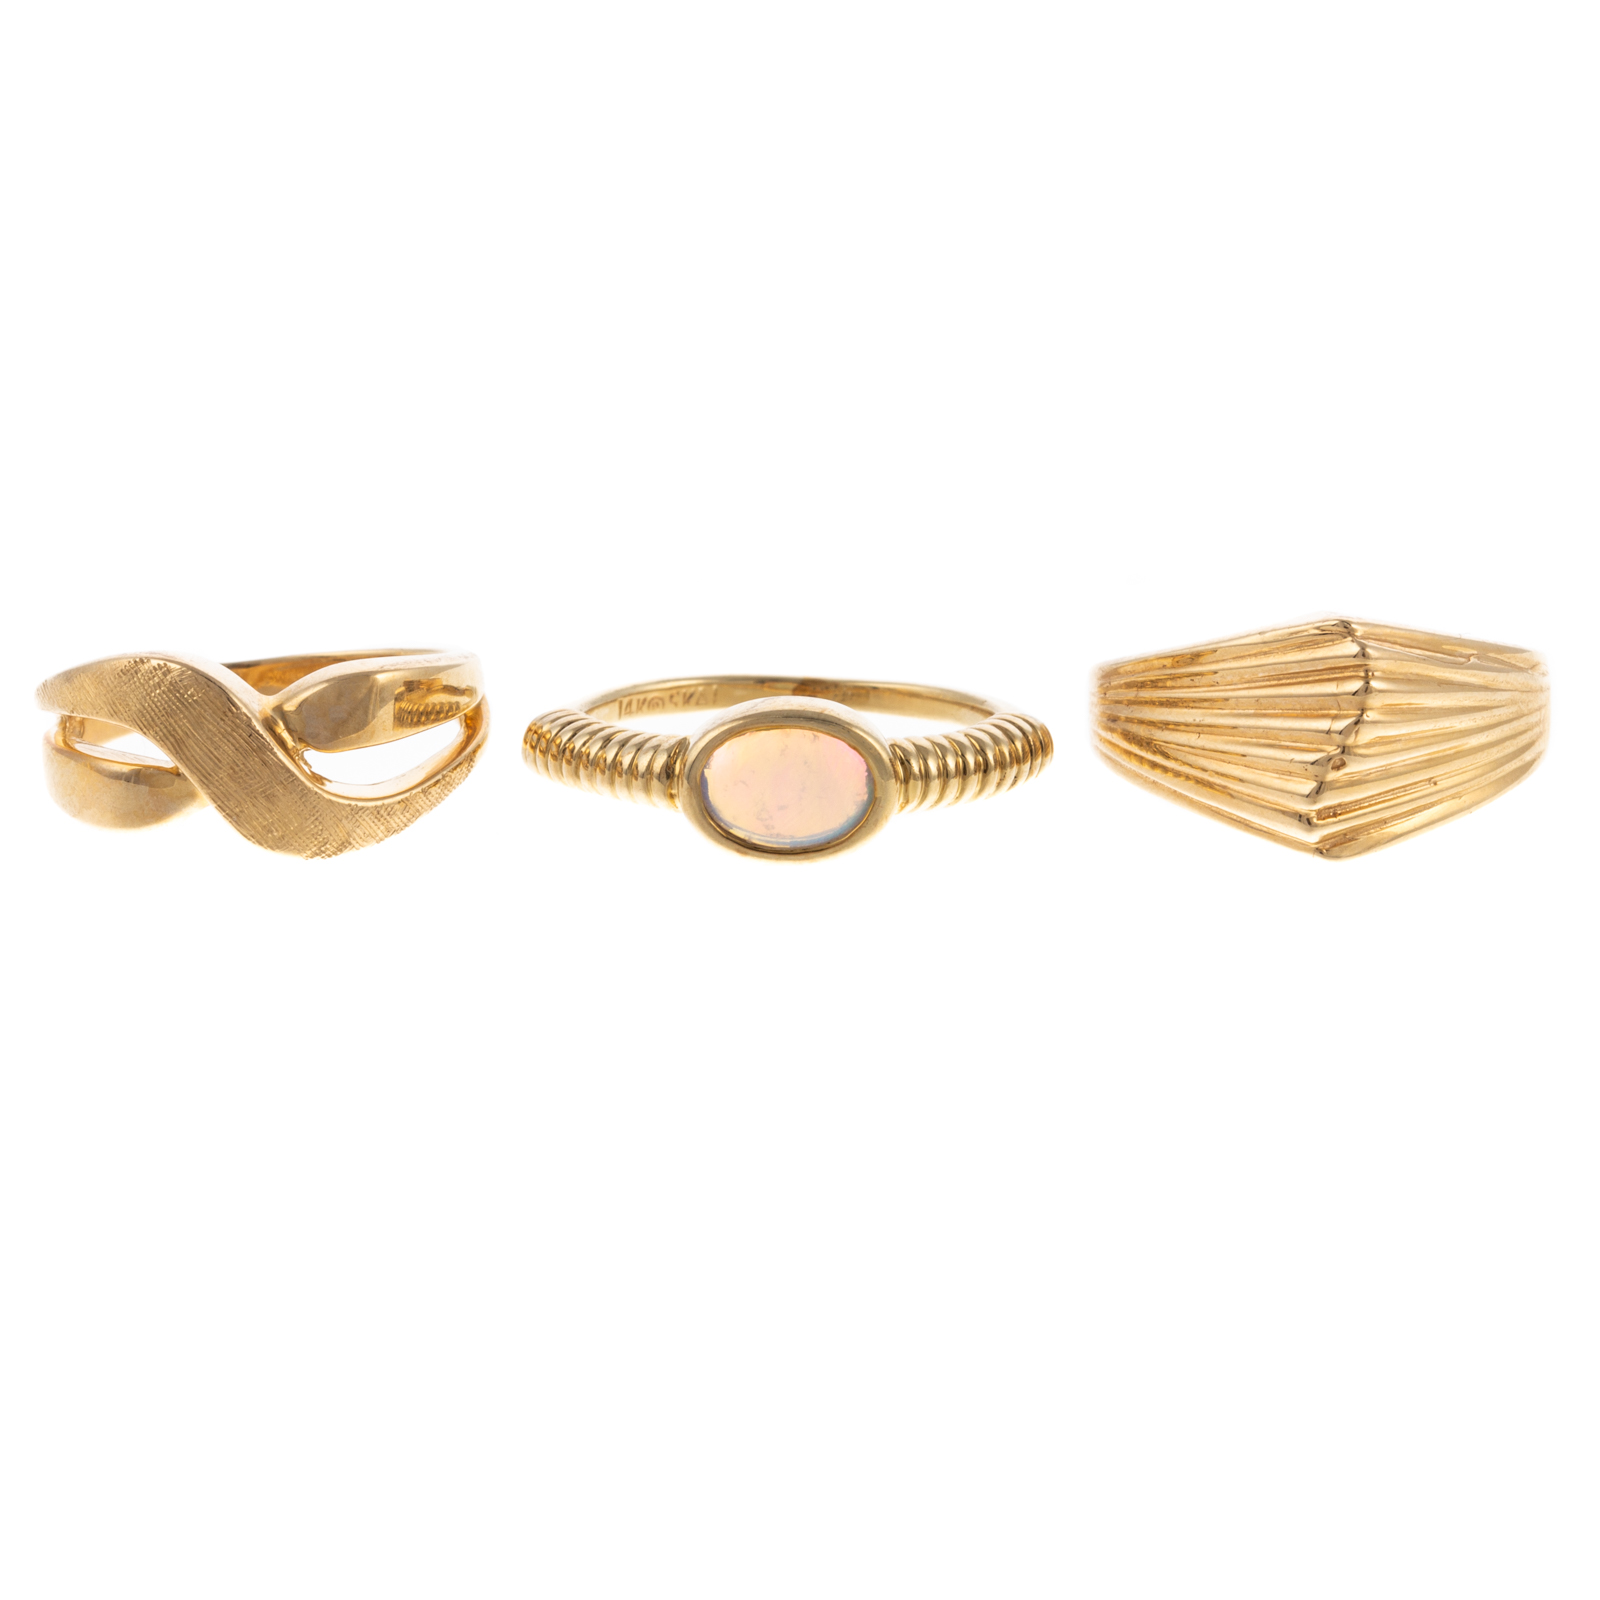 A TRIO OF RINGS IN 14K 1) 14K yellow